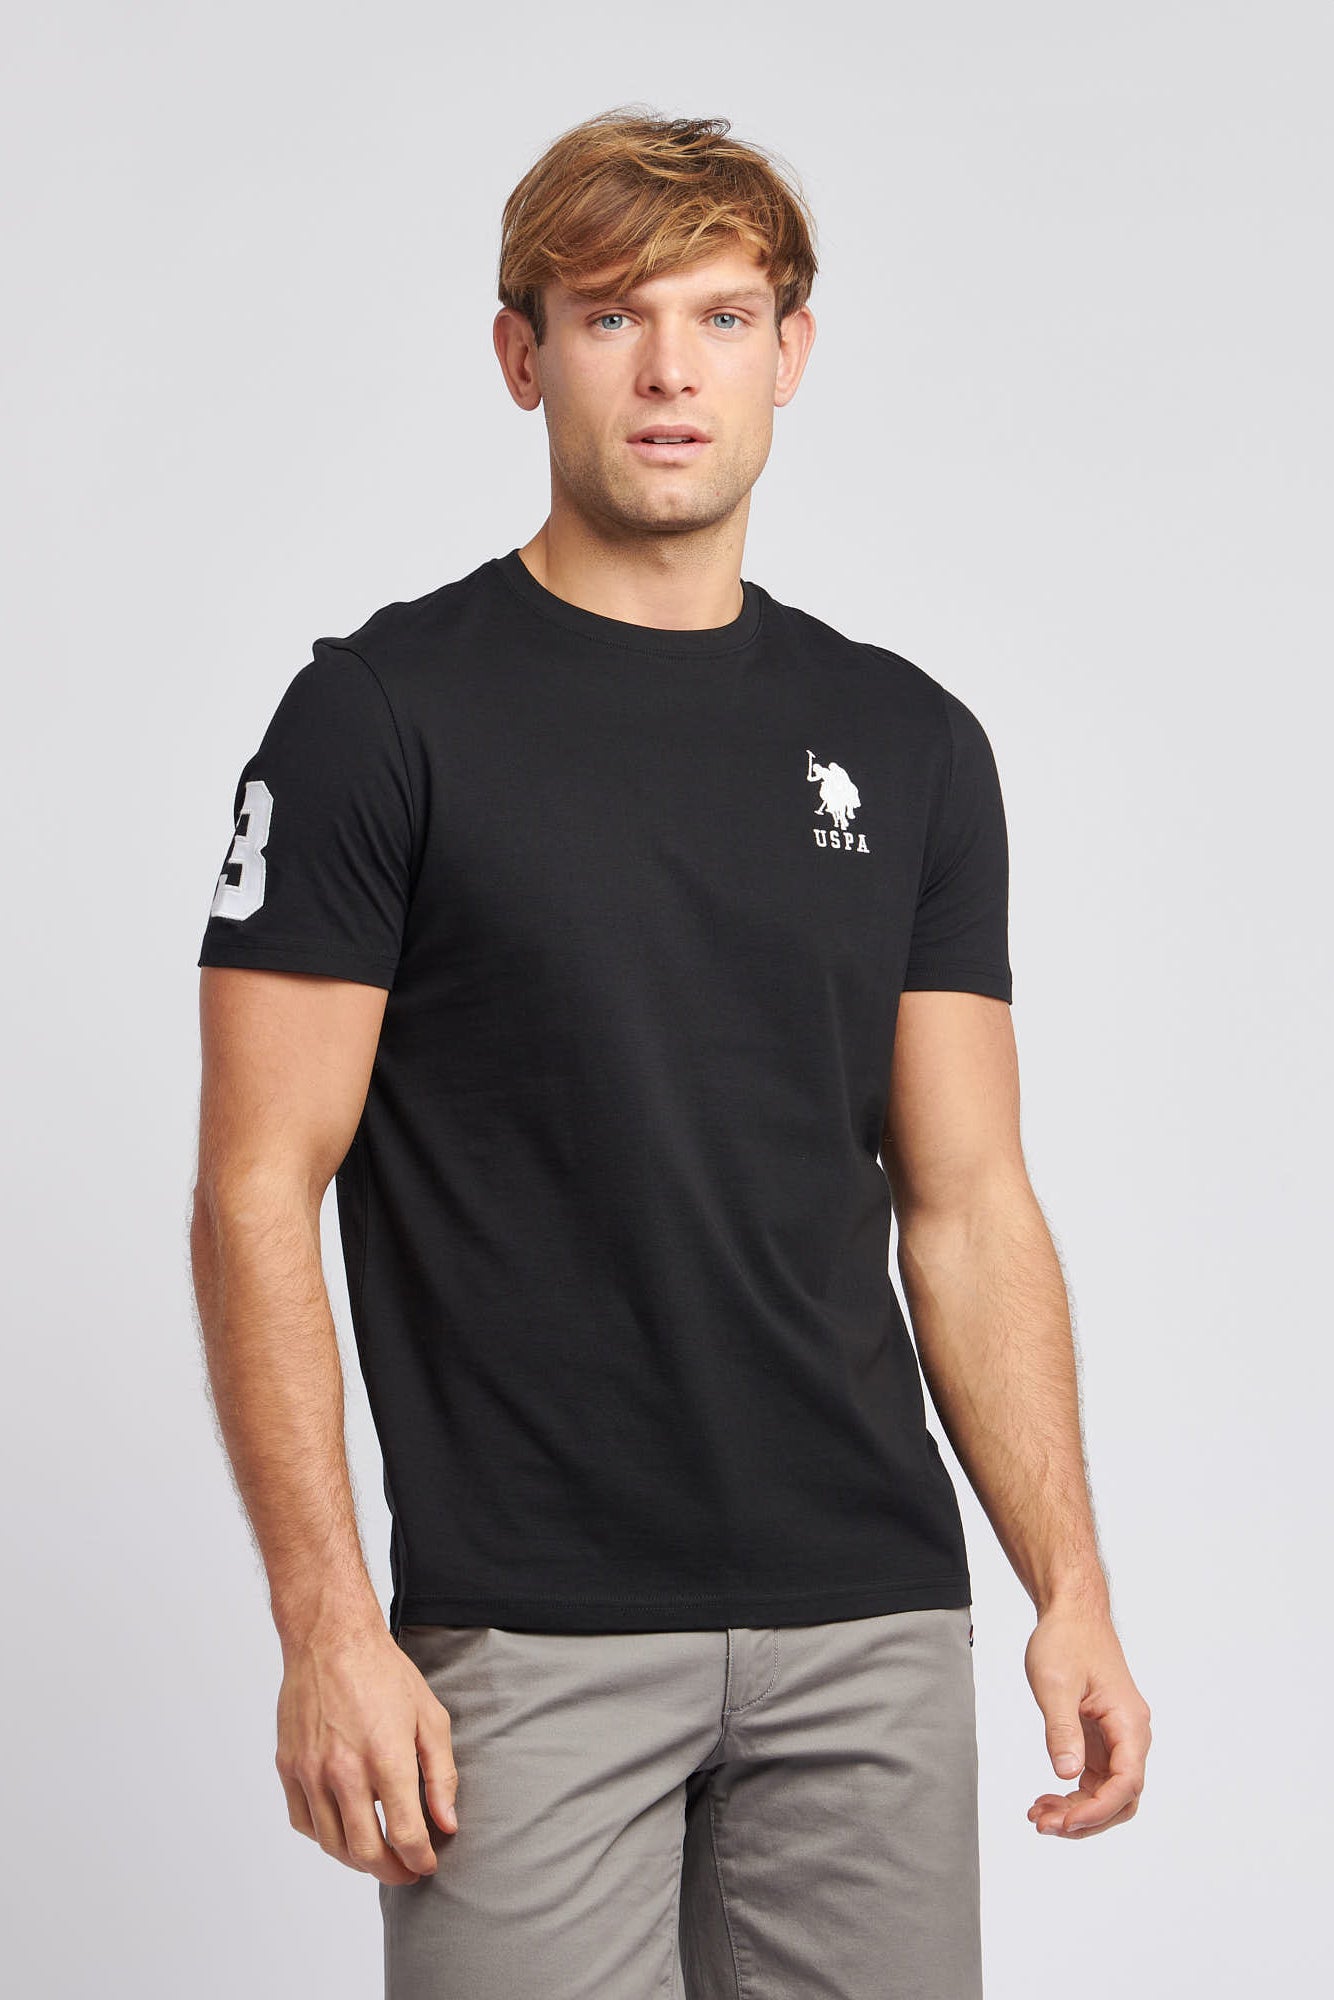 U.S. Polo Assn. Mens Player 3 T-Shirt in Black Bright White DHM